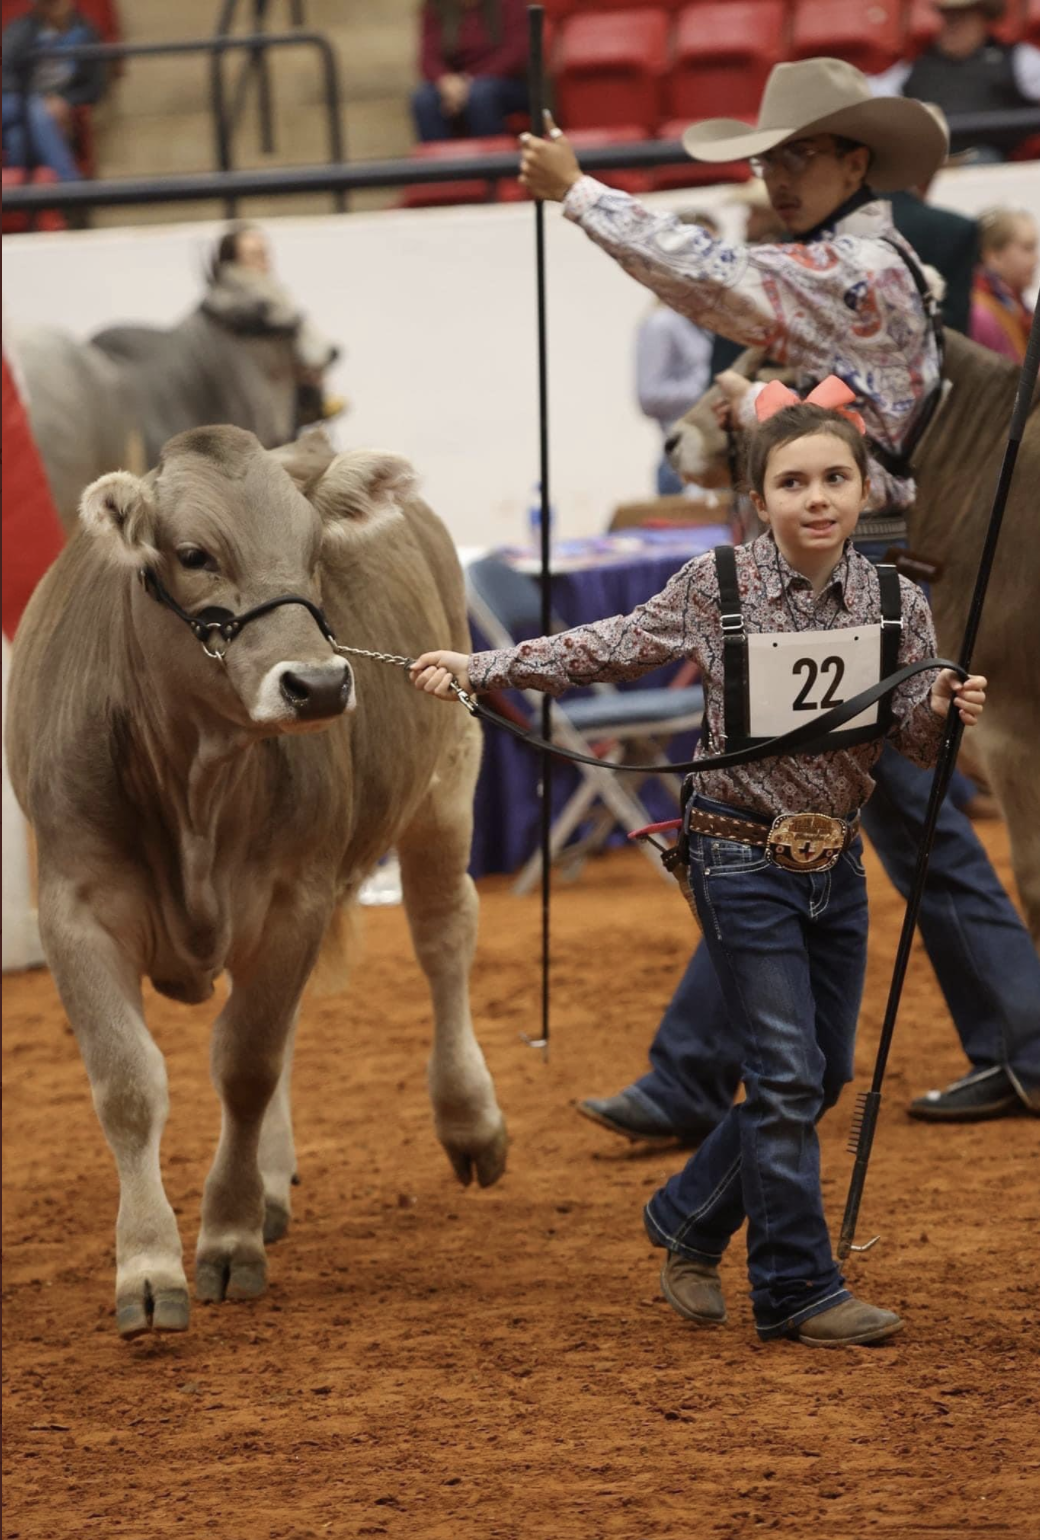 Hopkins succeeds at Fort Worth stock show